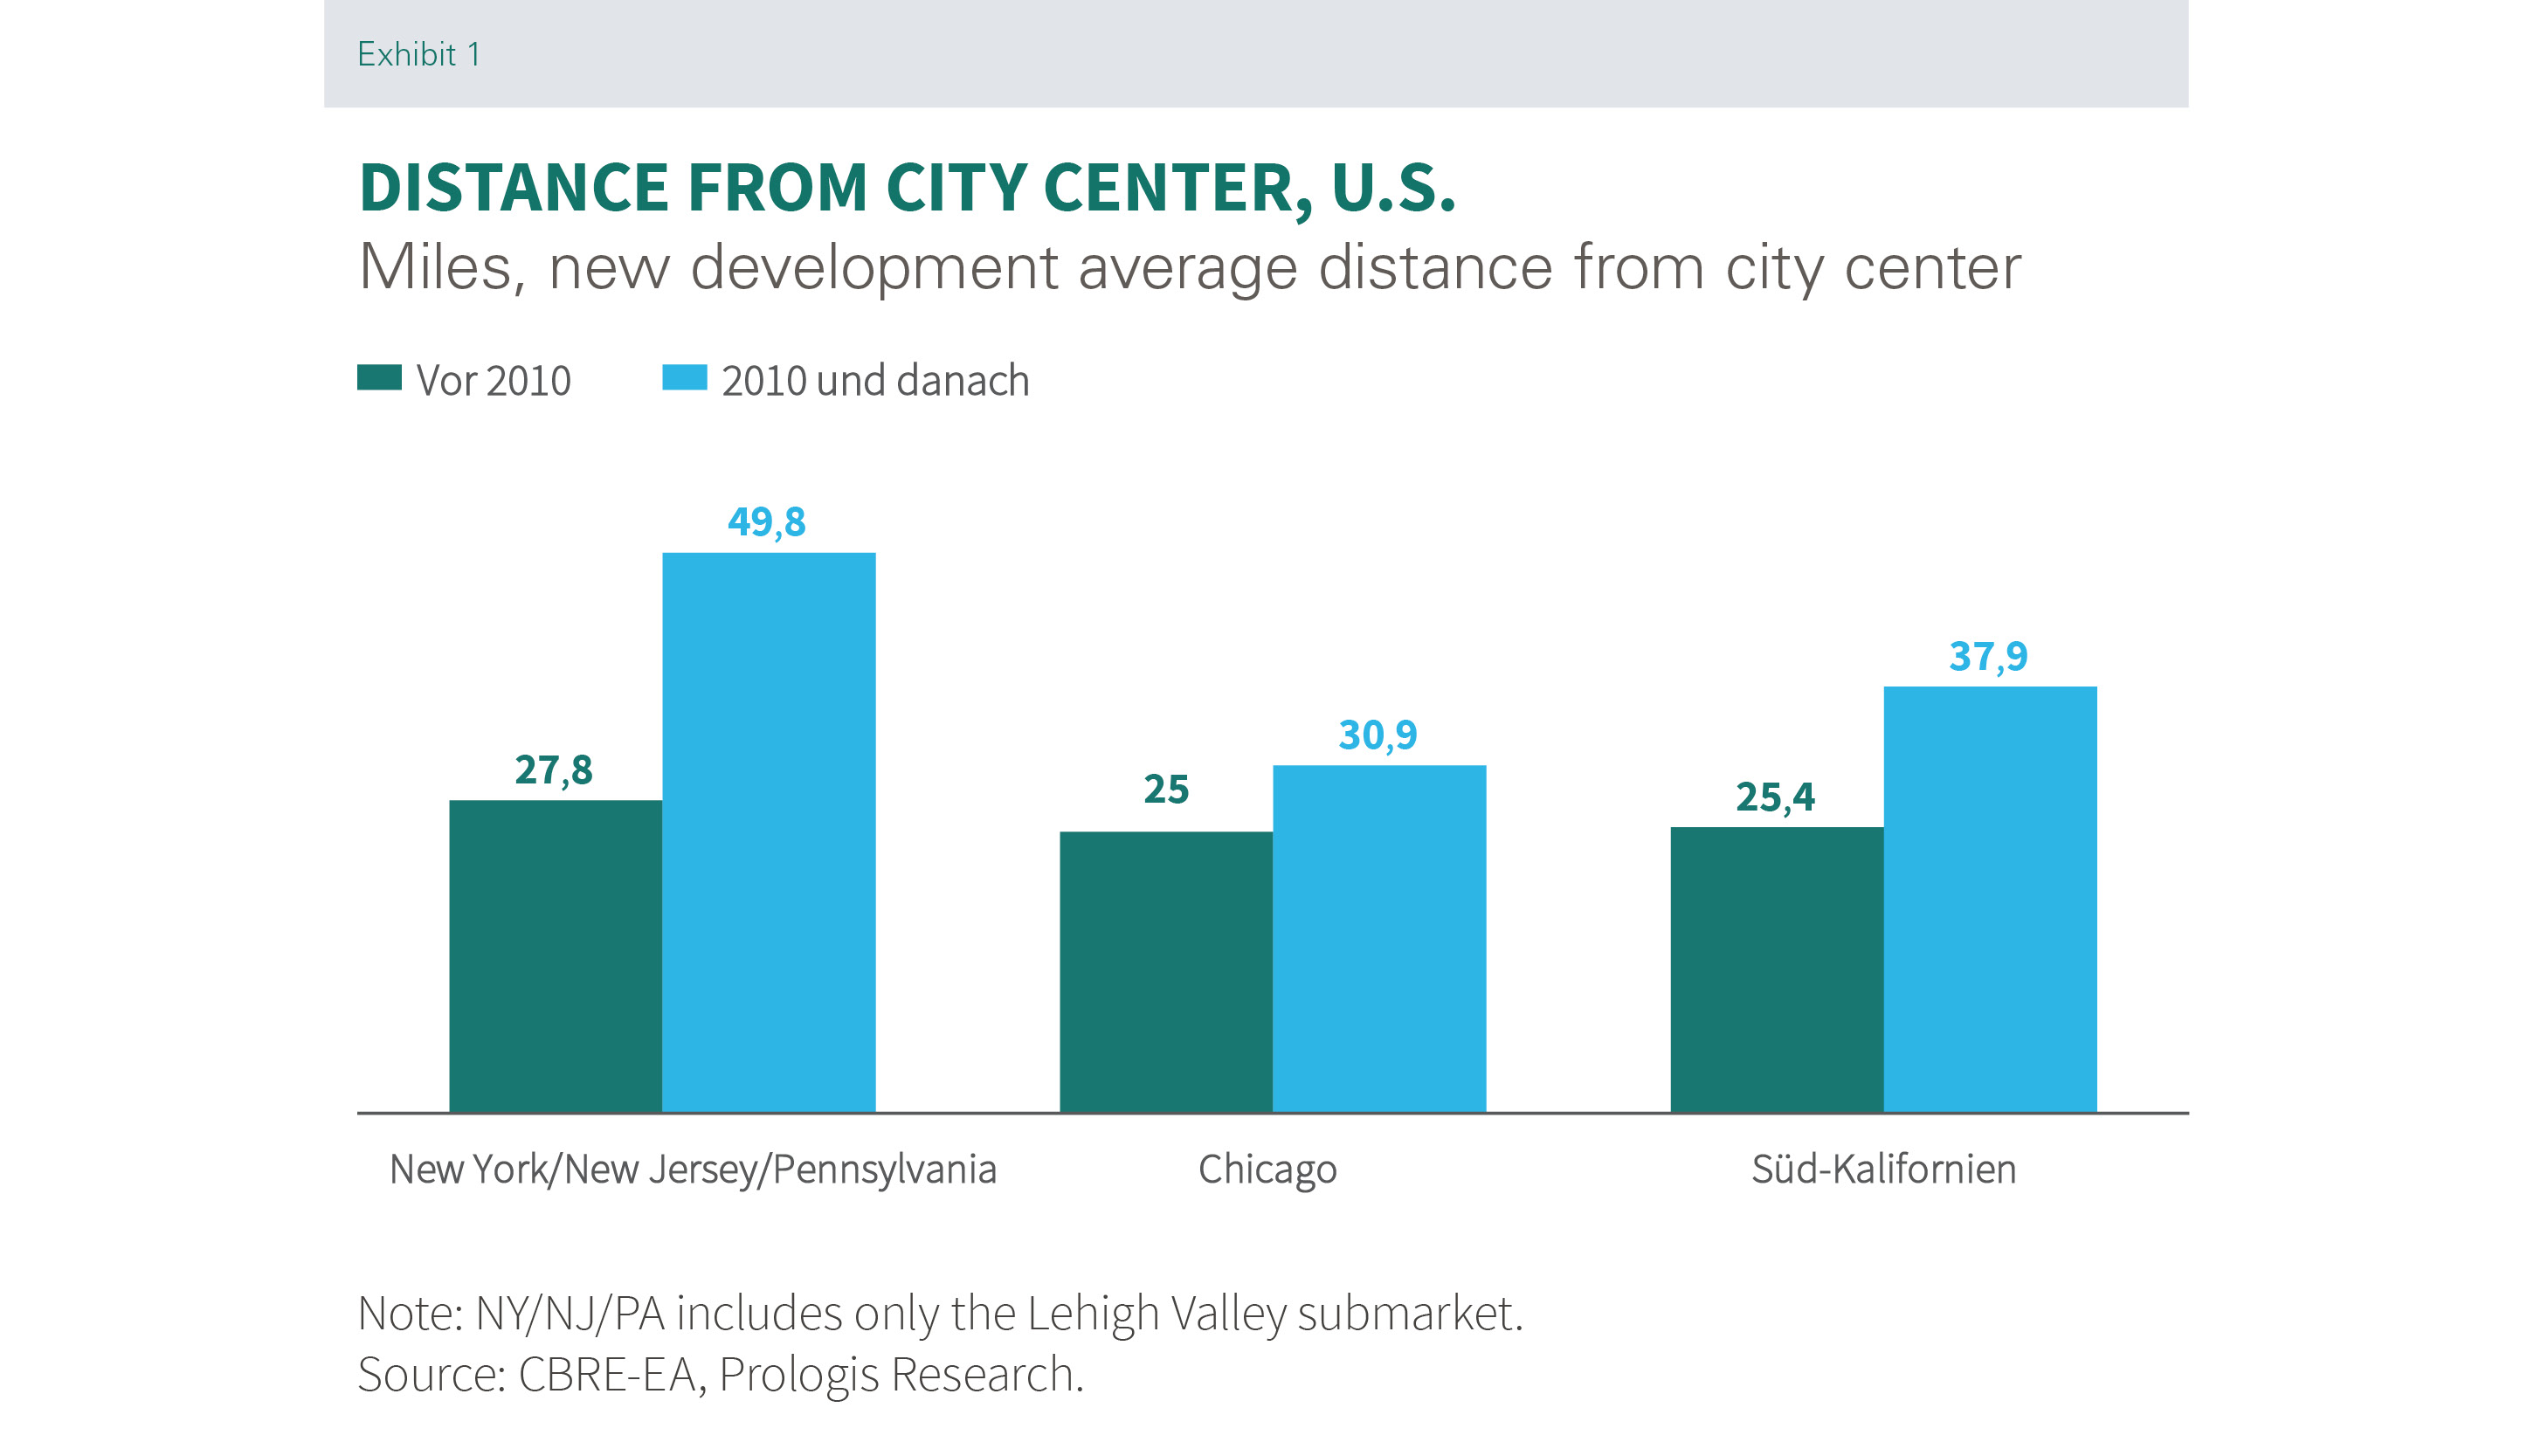 Prologis Research_Paper_Distance from city center_US